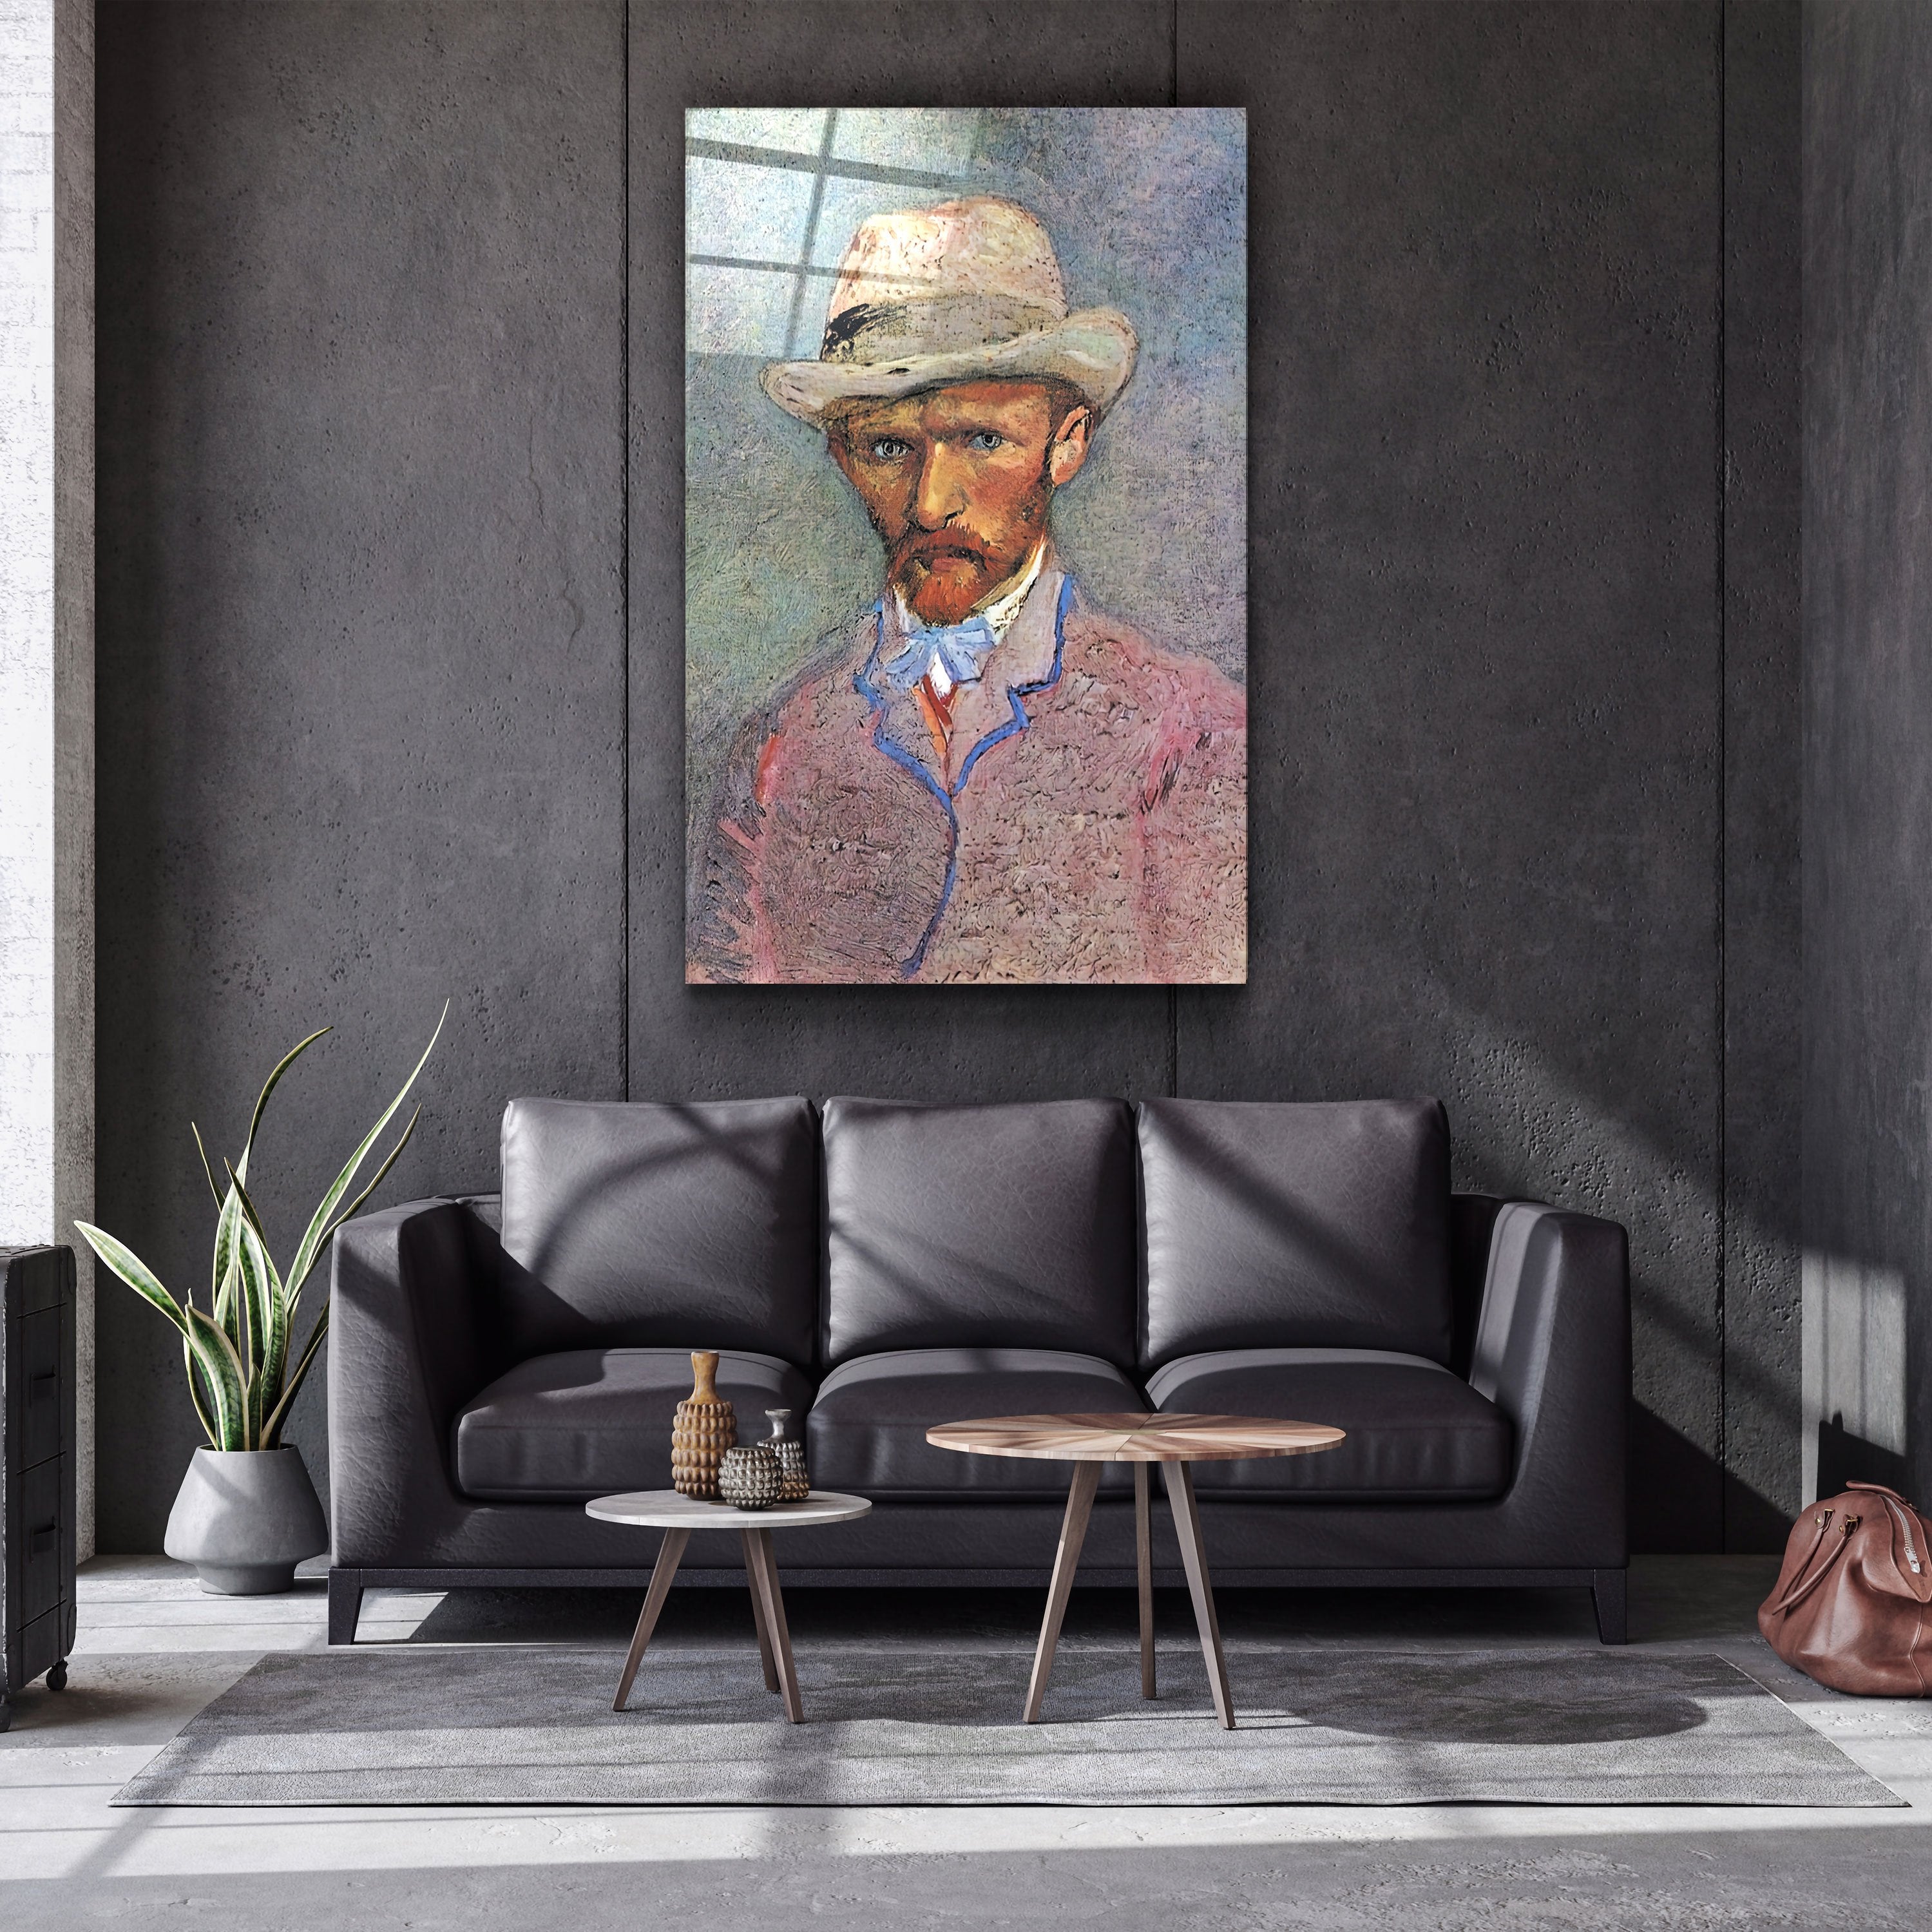 ・"Vincent van Gogh's Self-Portrait with a Gray Straw Hat (1887)"・Glass Wall Art